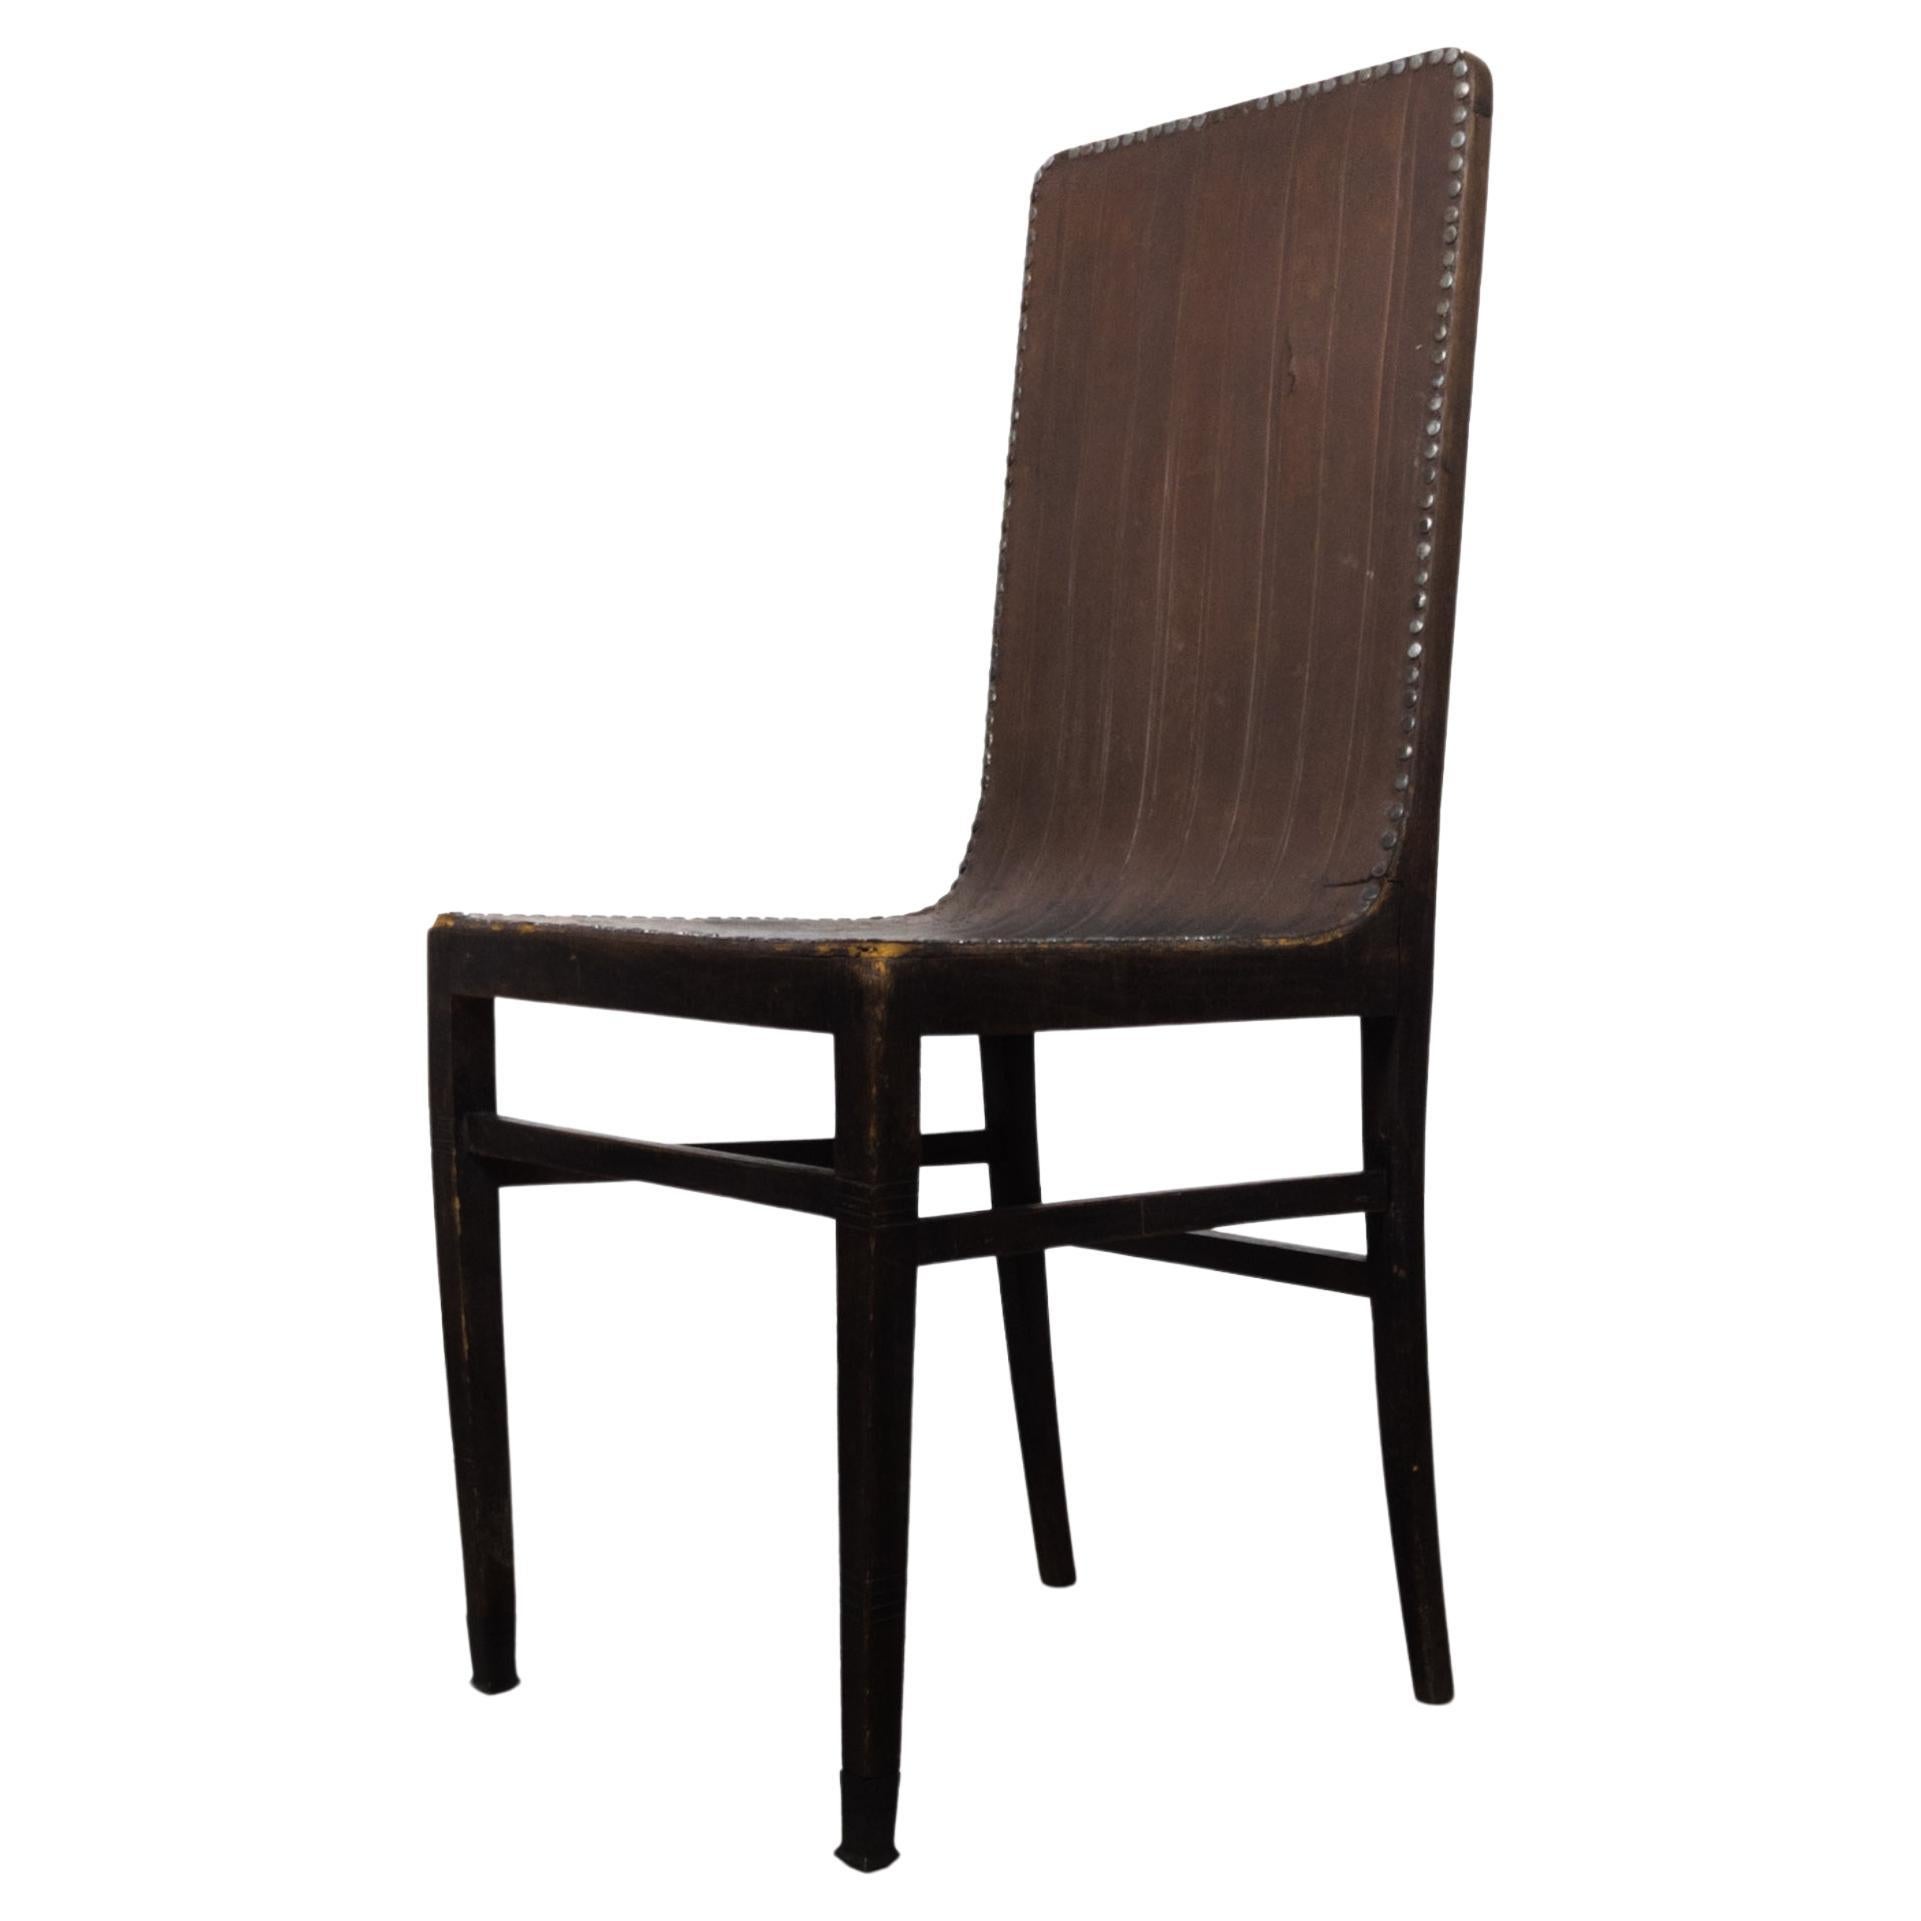 Early Josef Urban chair No. 405 For Sale